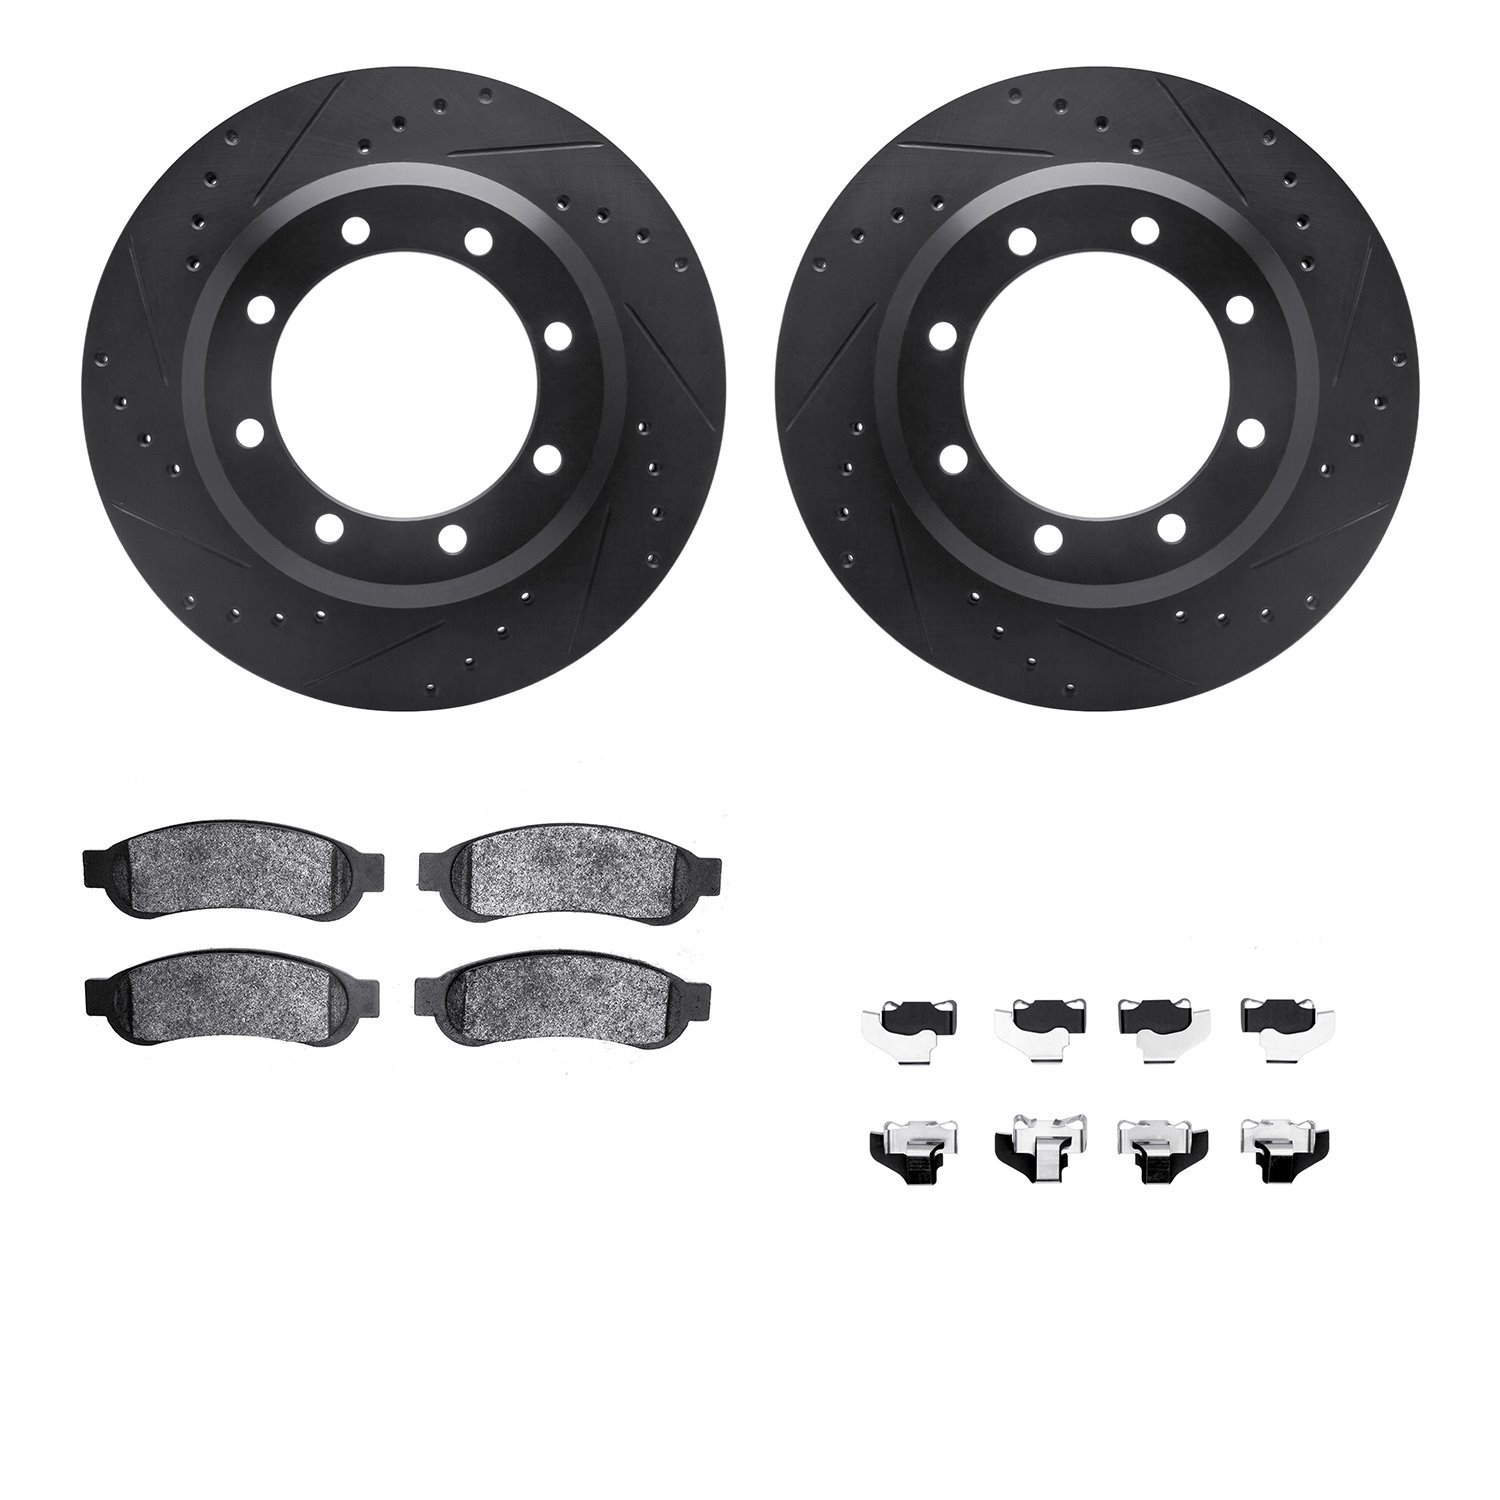 8412-54087 Drilled/Slotted Brake Rotors with Ultimate-Duty Brake Pads Kit & Hardware [Black], 2010-2012 Ford/Lincoln/Mercury/Maz